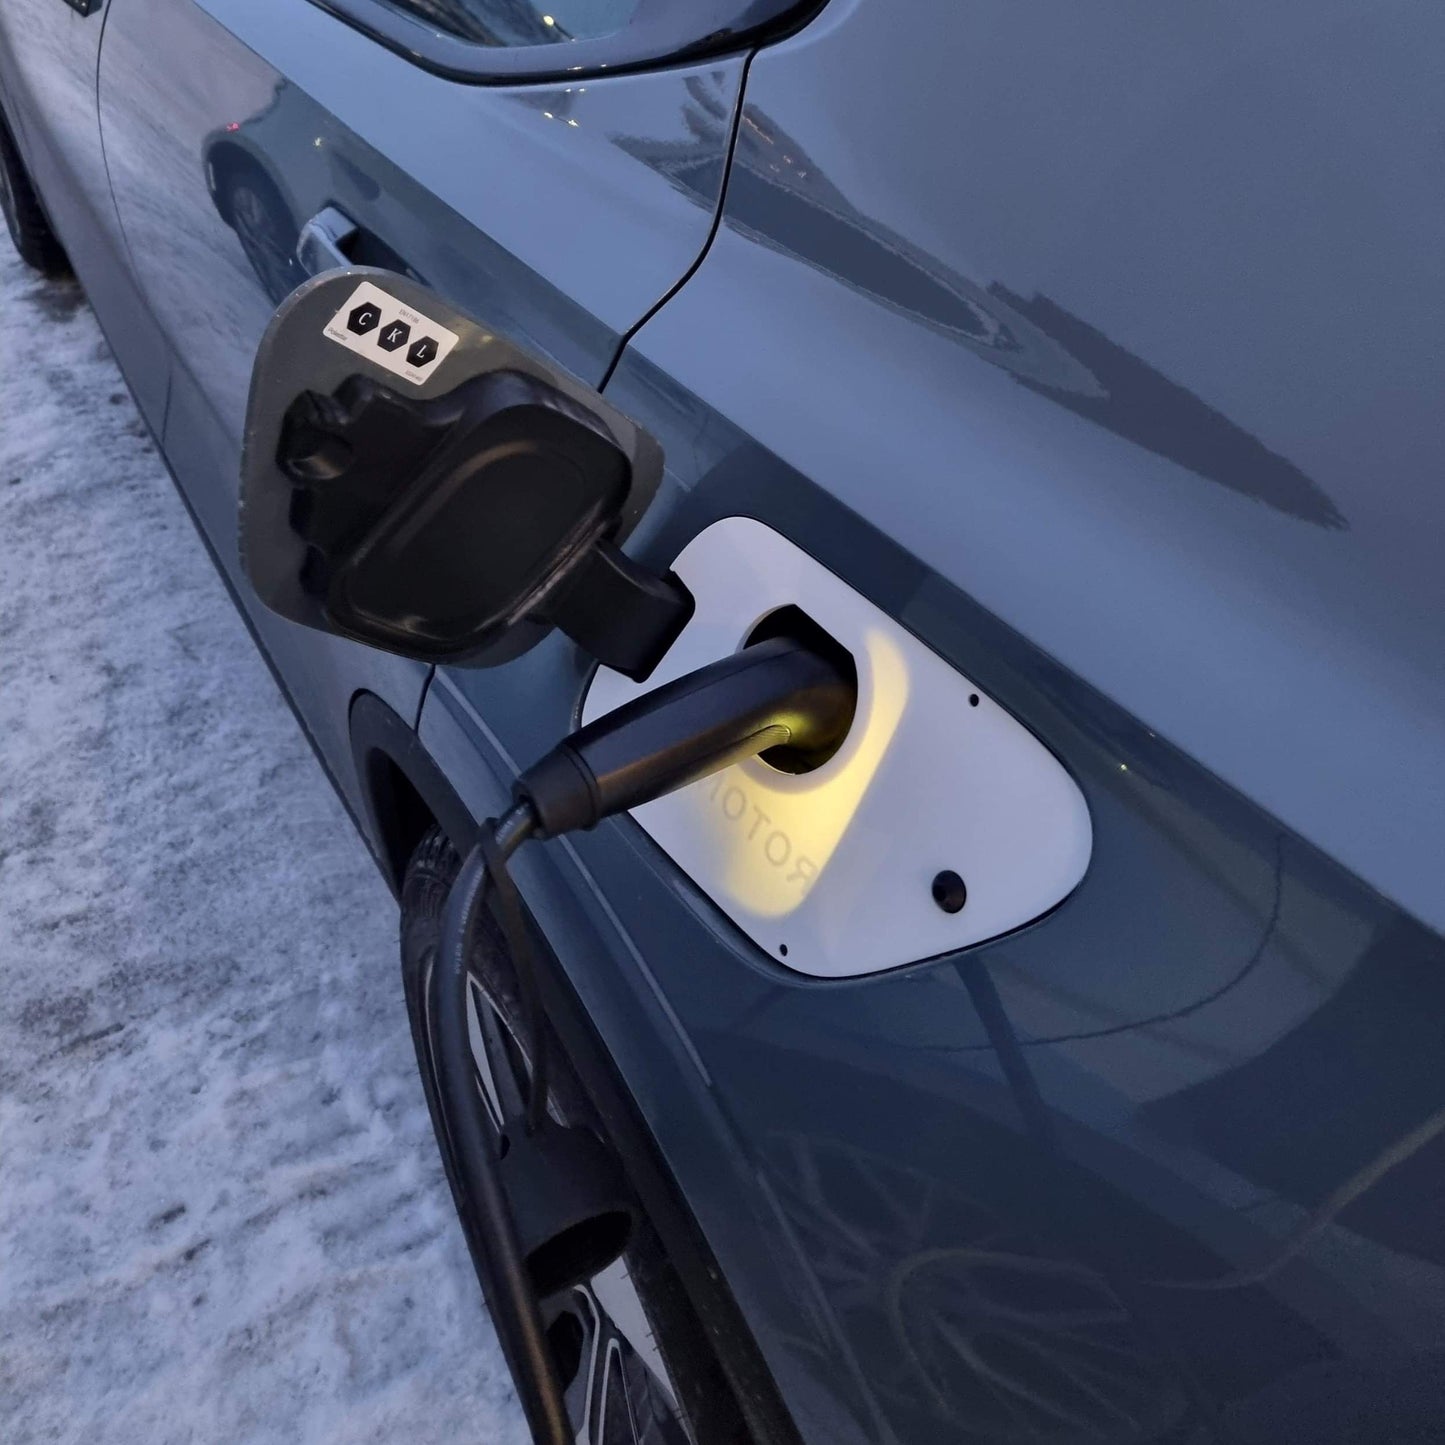 Polestar 2 Weather and Snow Cover for Charging Port - Compact